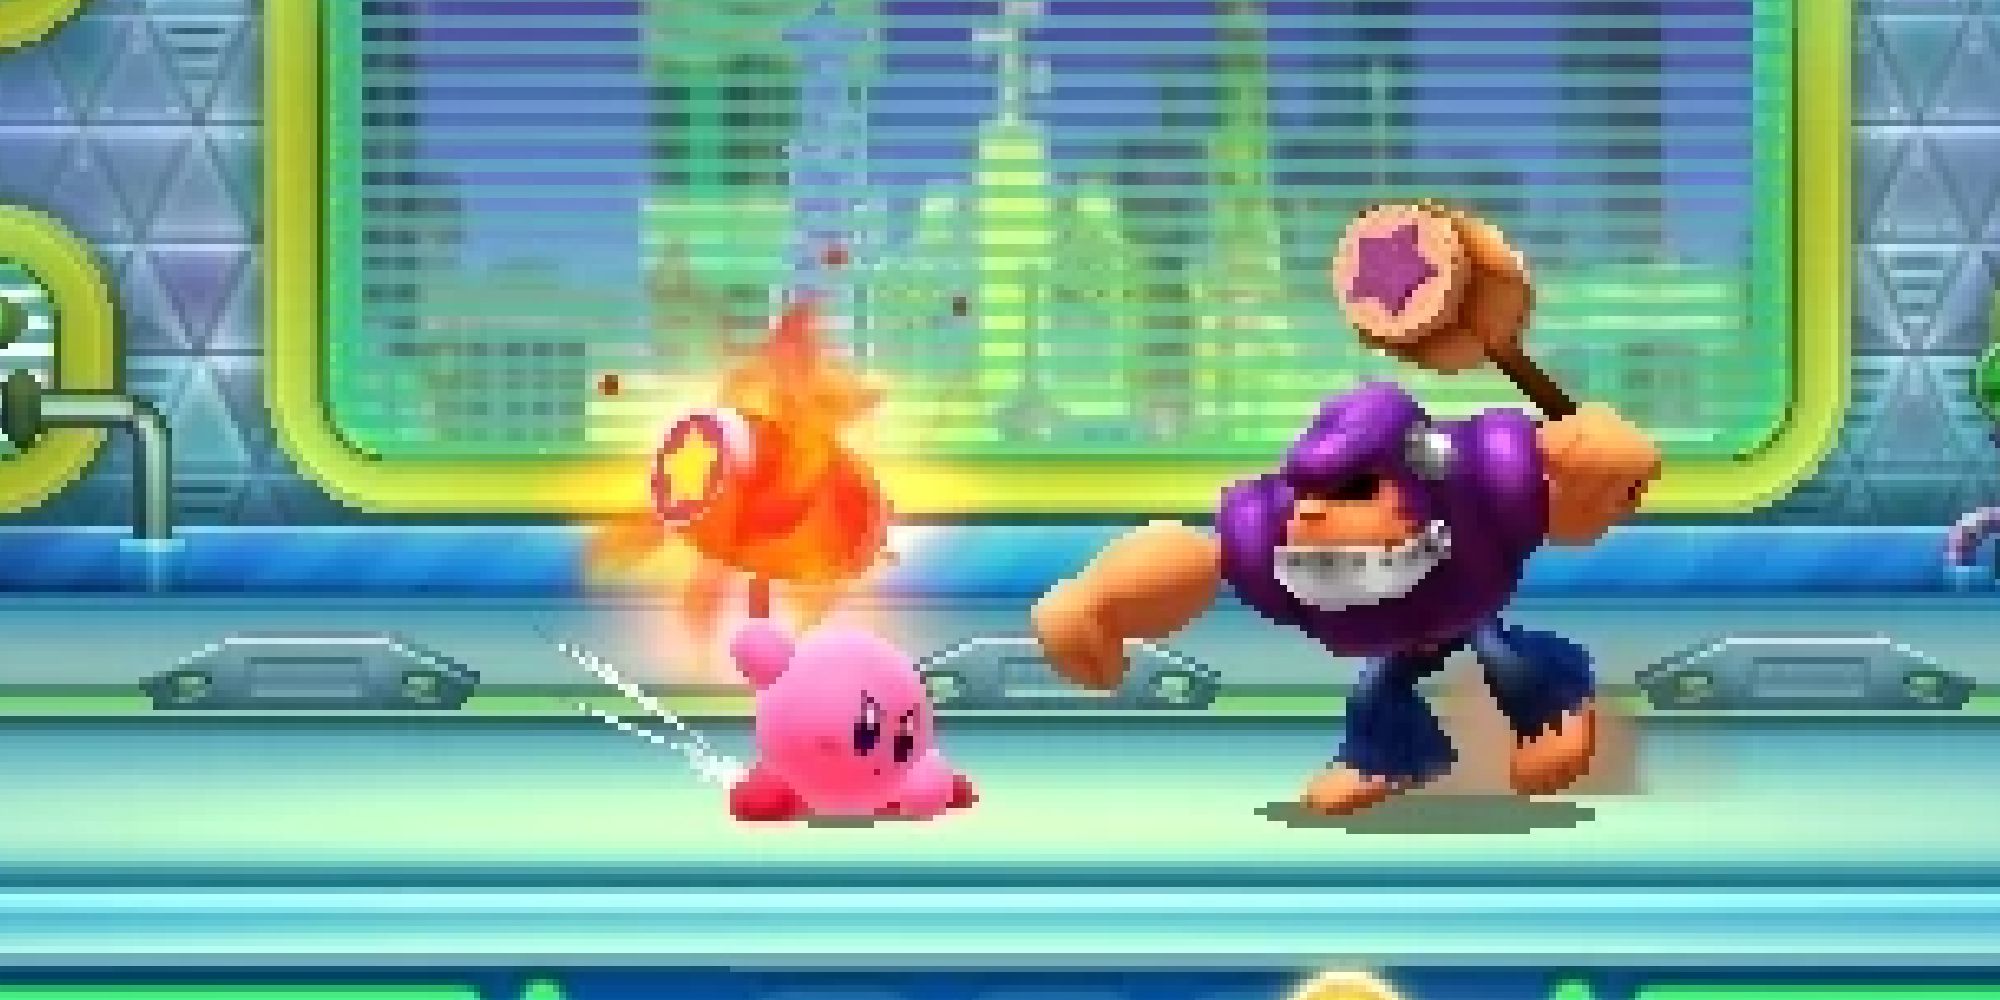 Kirby preparing to hit an enemy with a charged Hammer attack in Kirby Planet Robobot